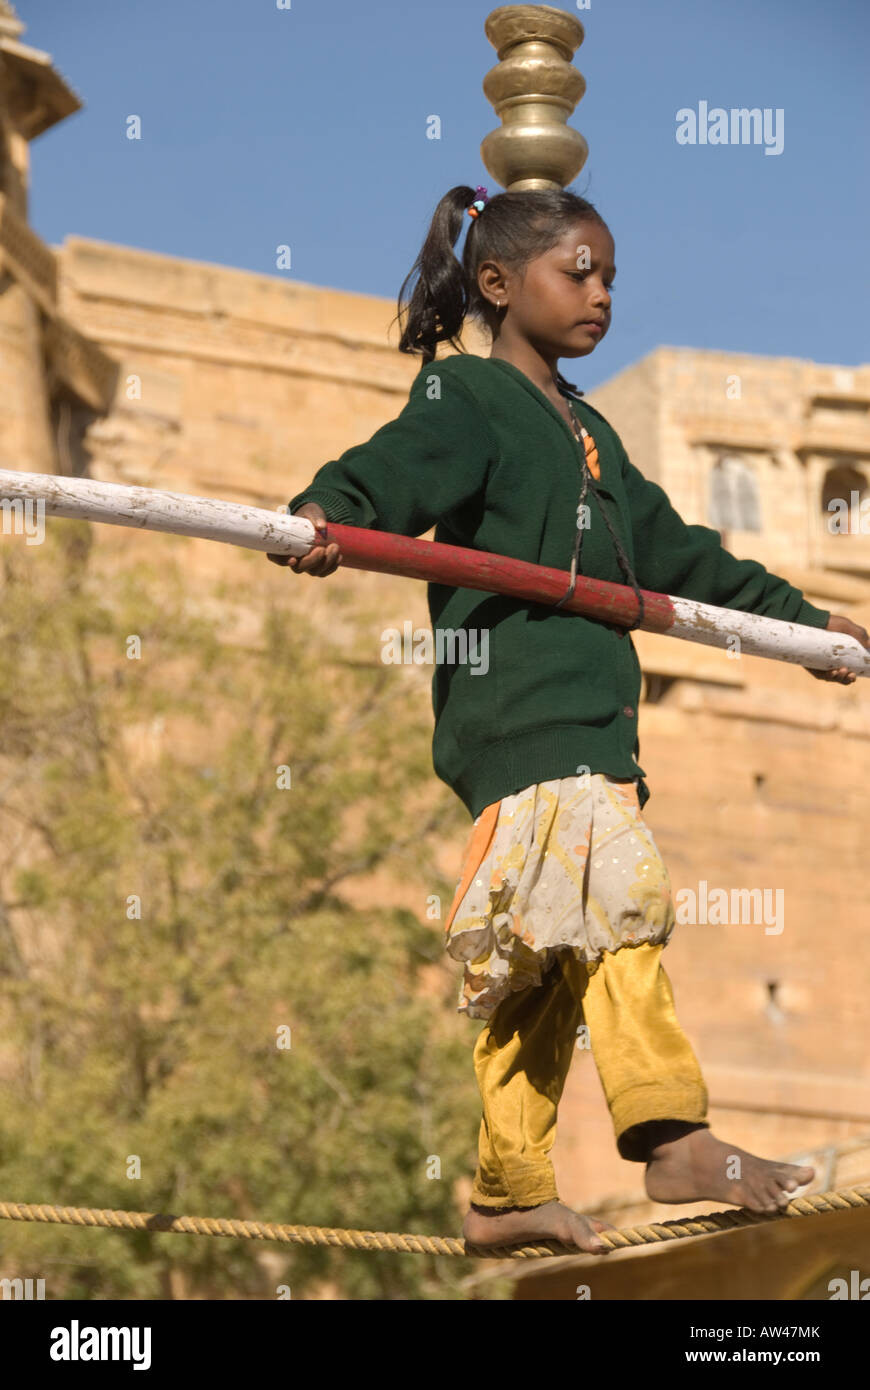 Portrait of an Indian girl making a living as a tightrope walker. Stock Photo